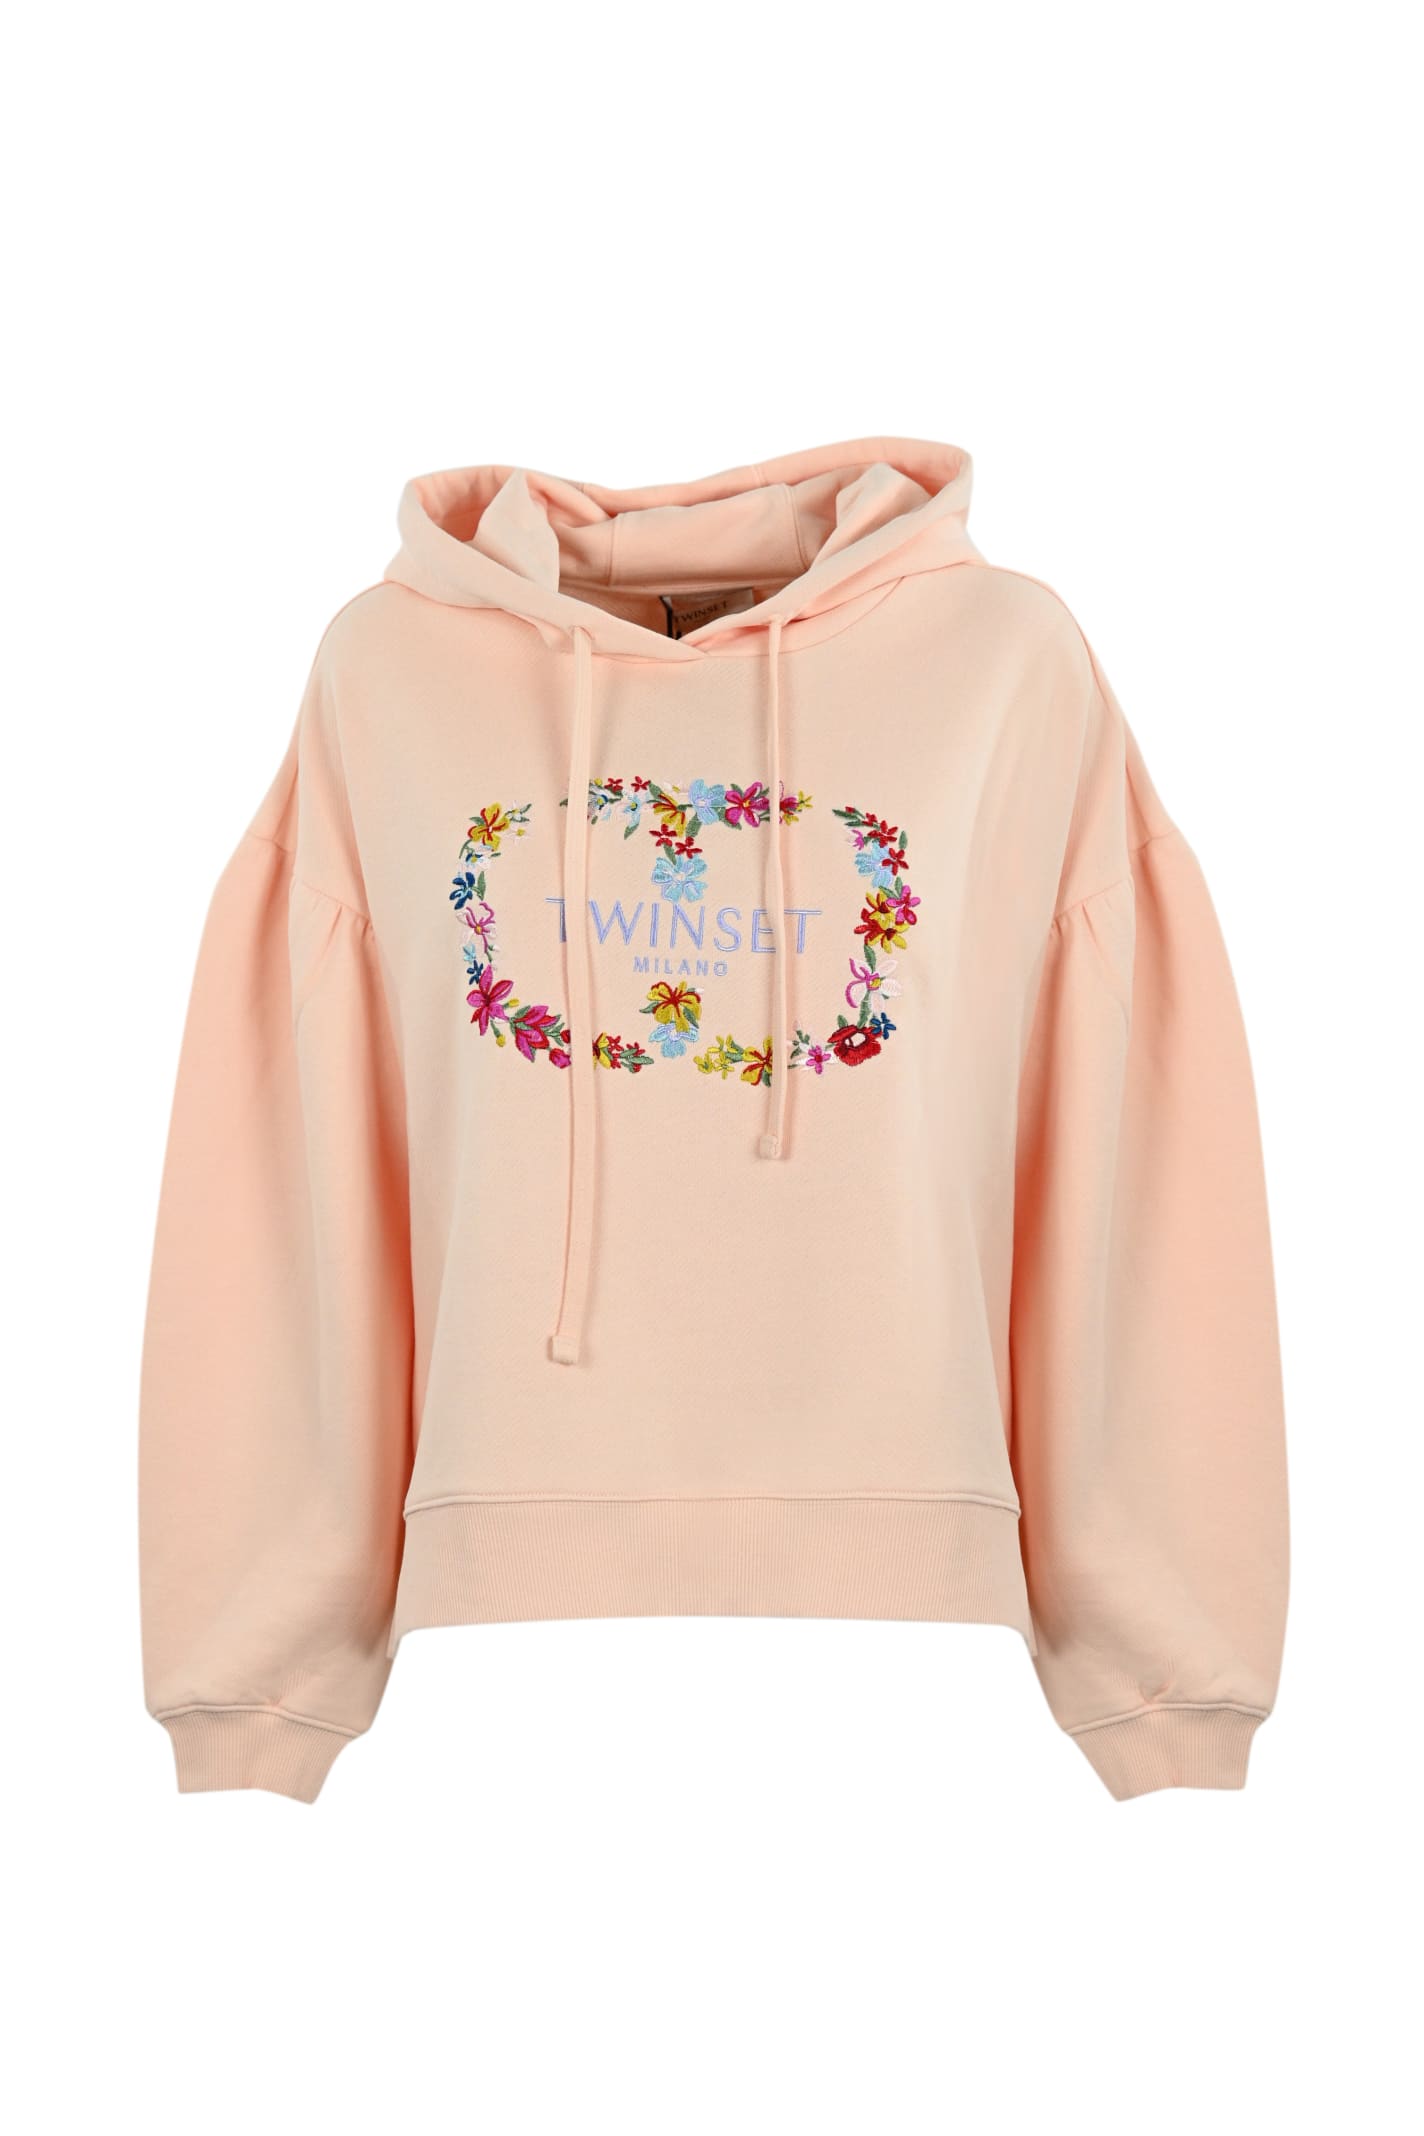 Twinset Sweatshirt With Floral Embroidery In Cupcake Pink